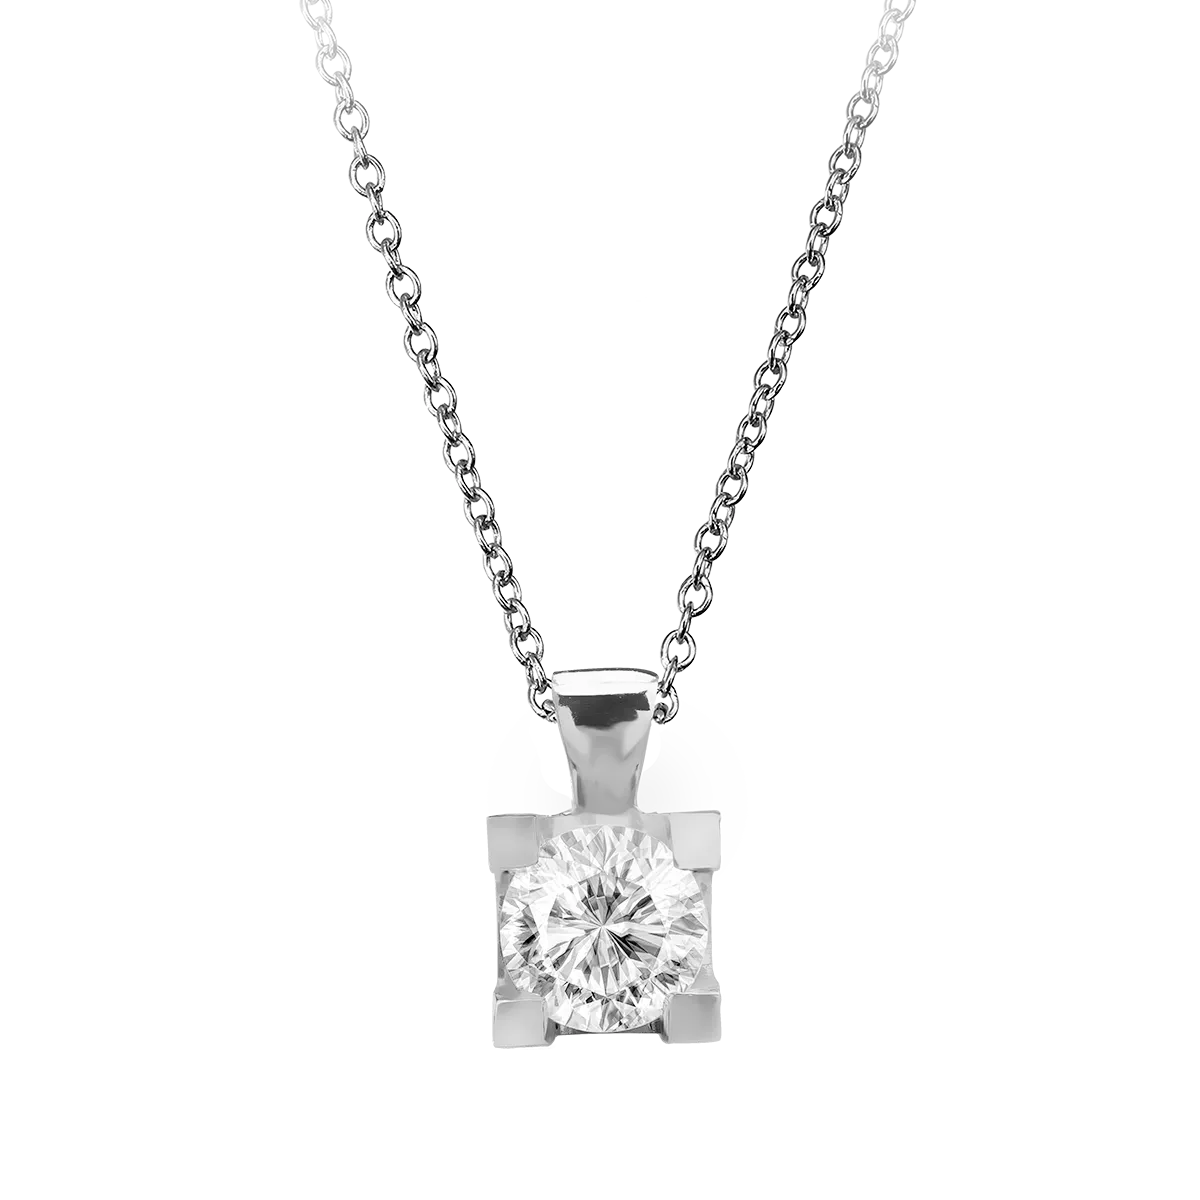 18K white gold pendant necklace with 0.4ct diamond